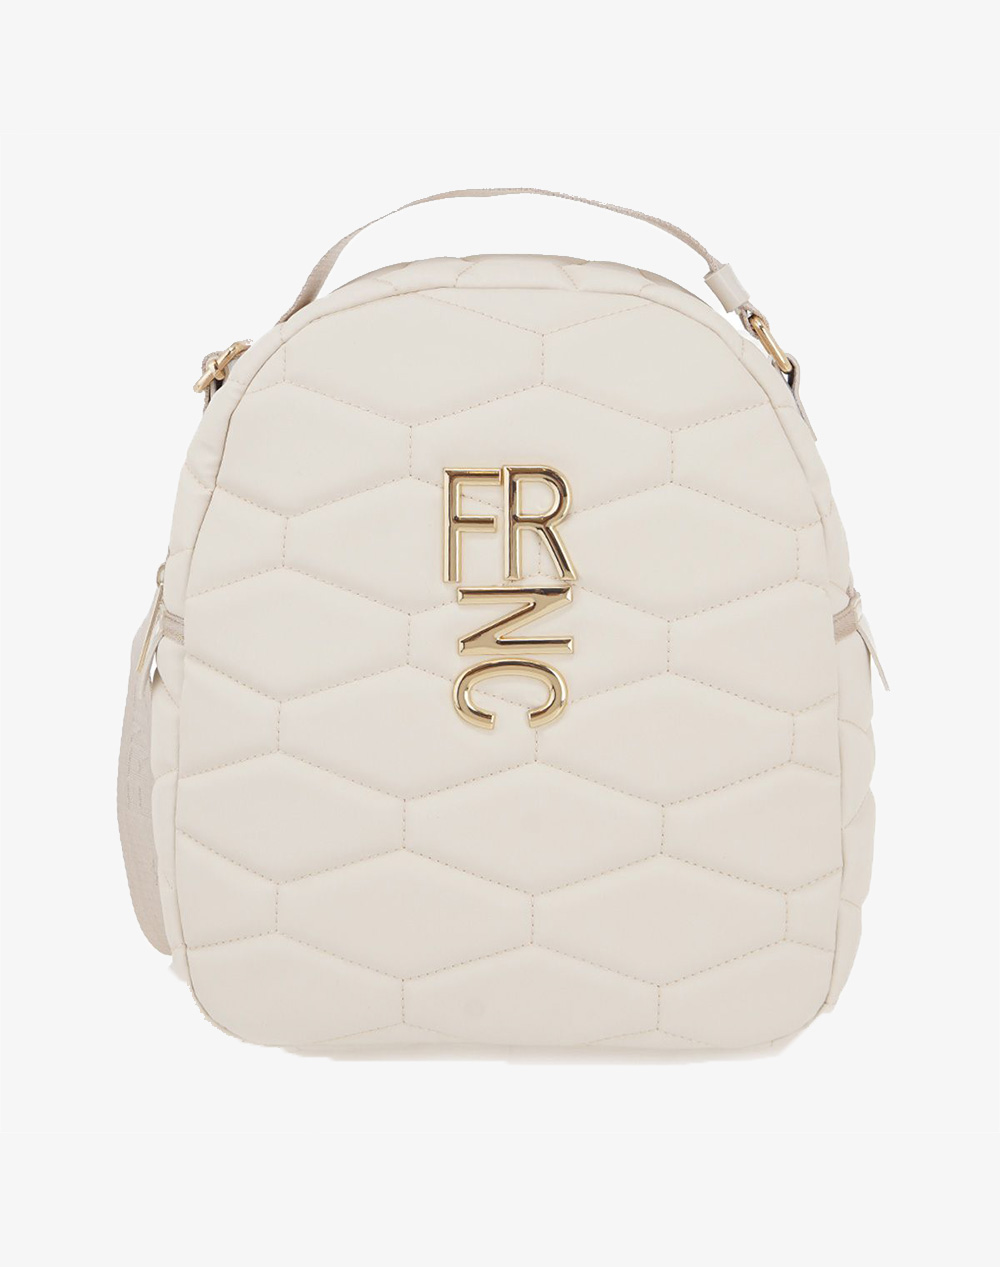 FRNC BACKPACK (Διαστάσεις: 12 x 30.5 x 28 εκ) S618R908907S-07S Ivory 3810PT-FC6220021_90132